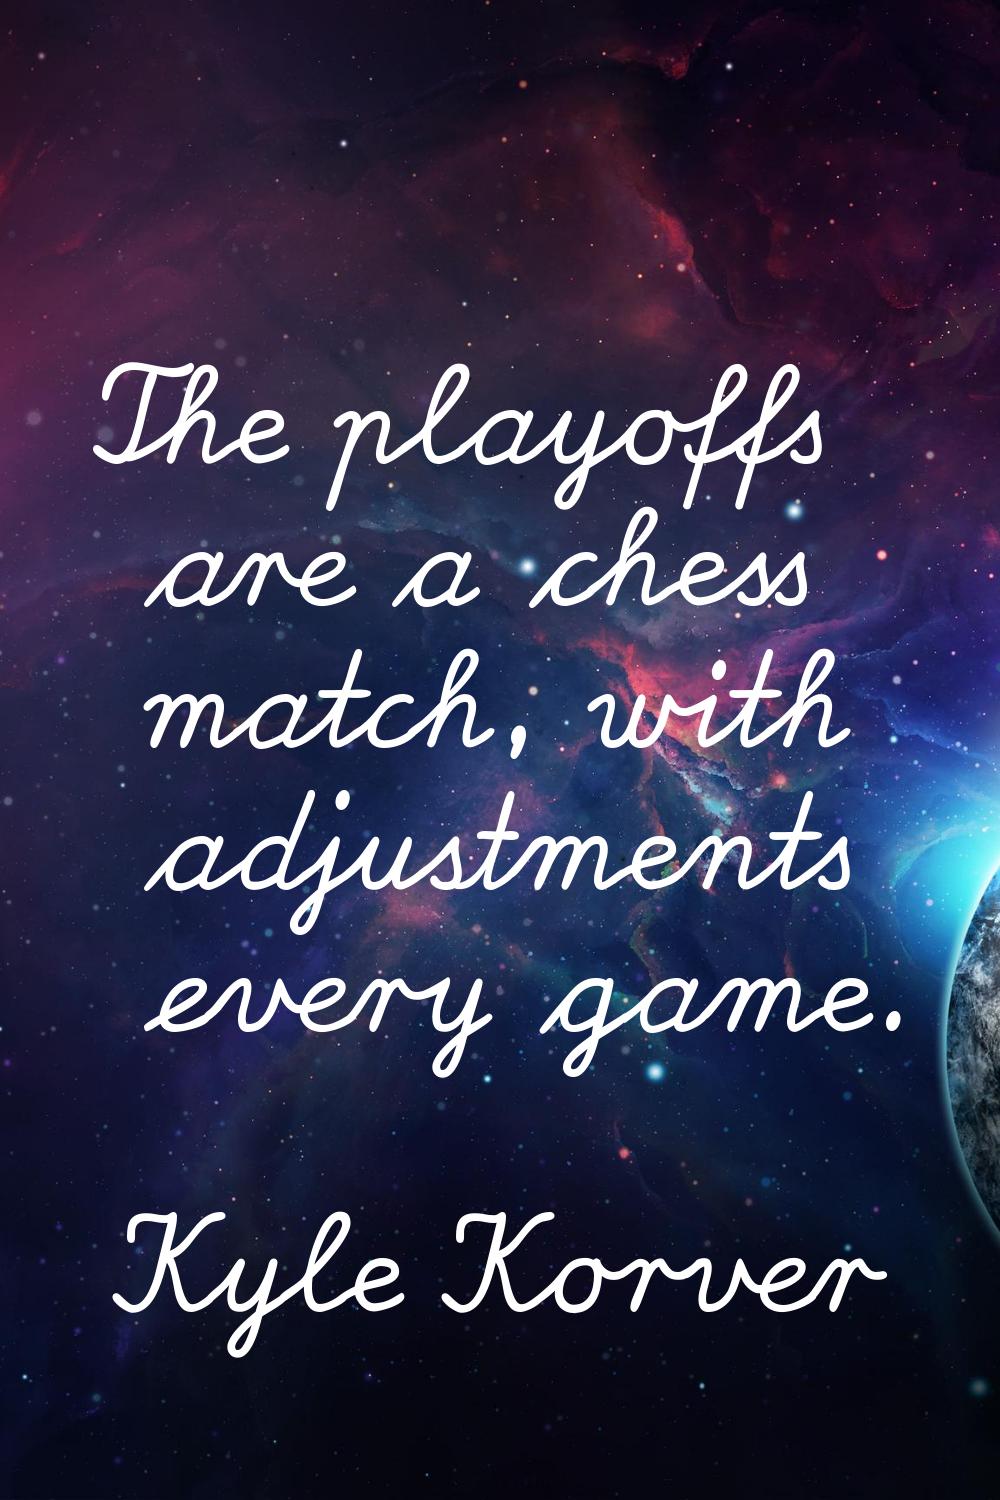 The playoffs are a chess match, with adjustments every game.